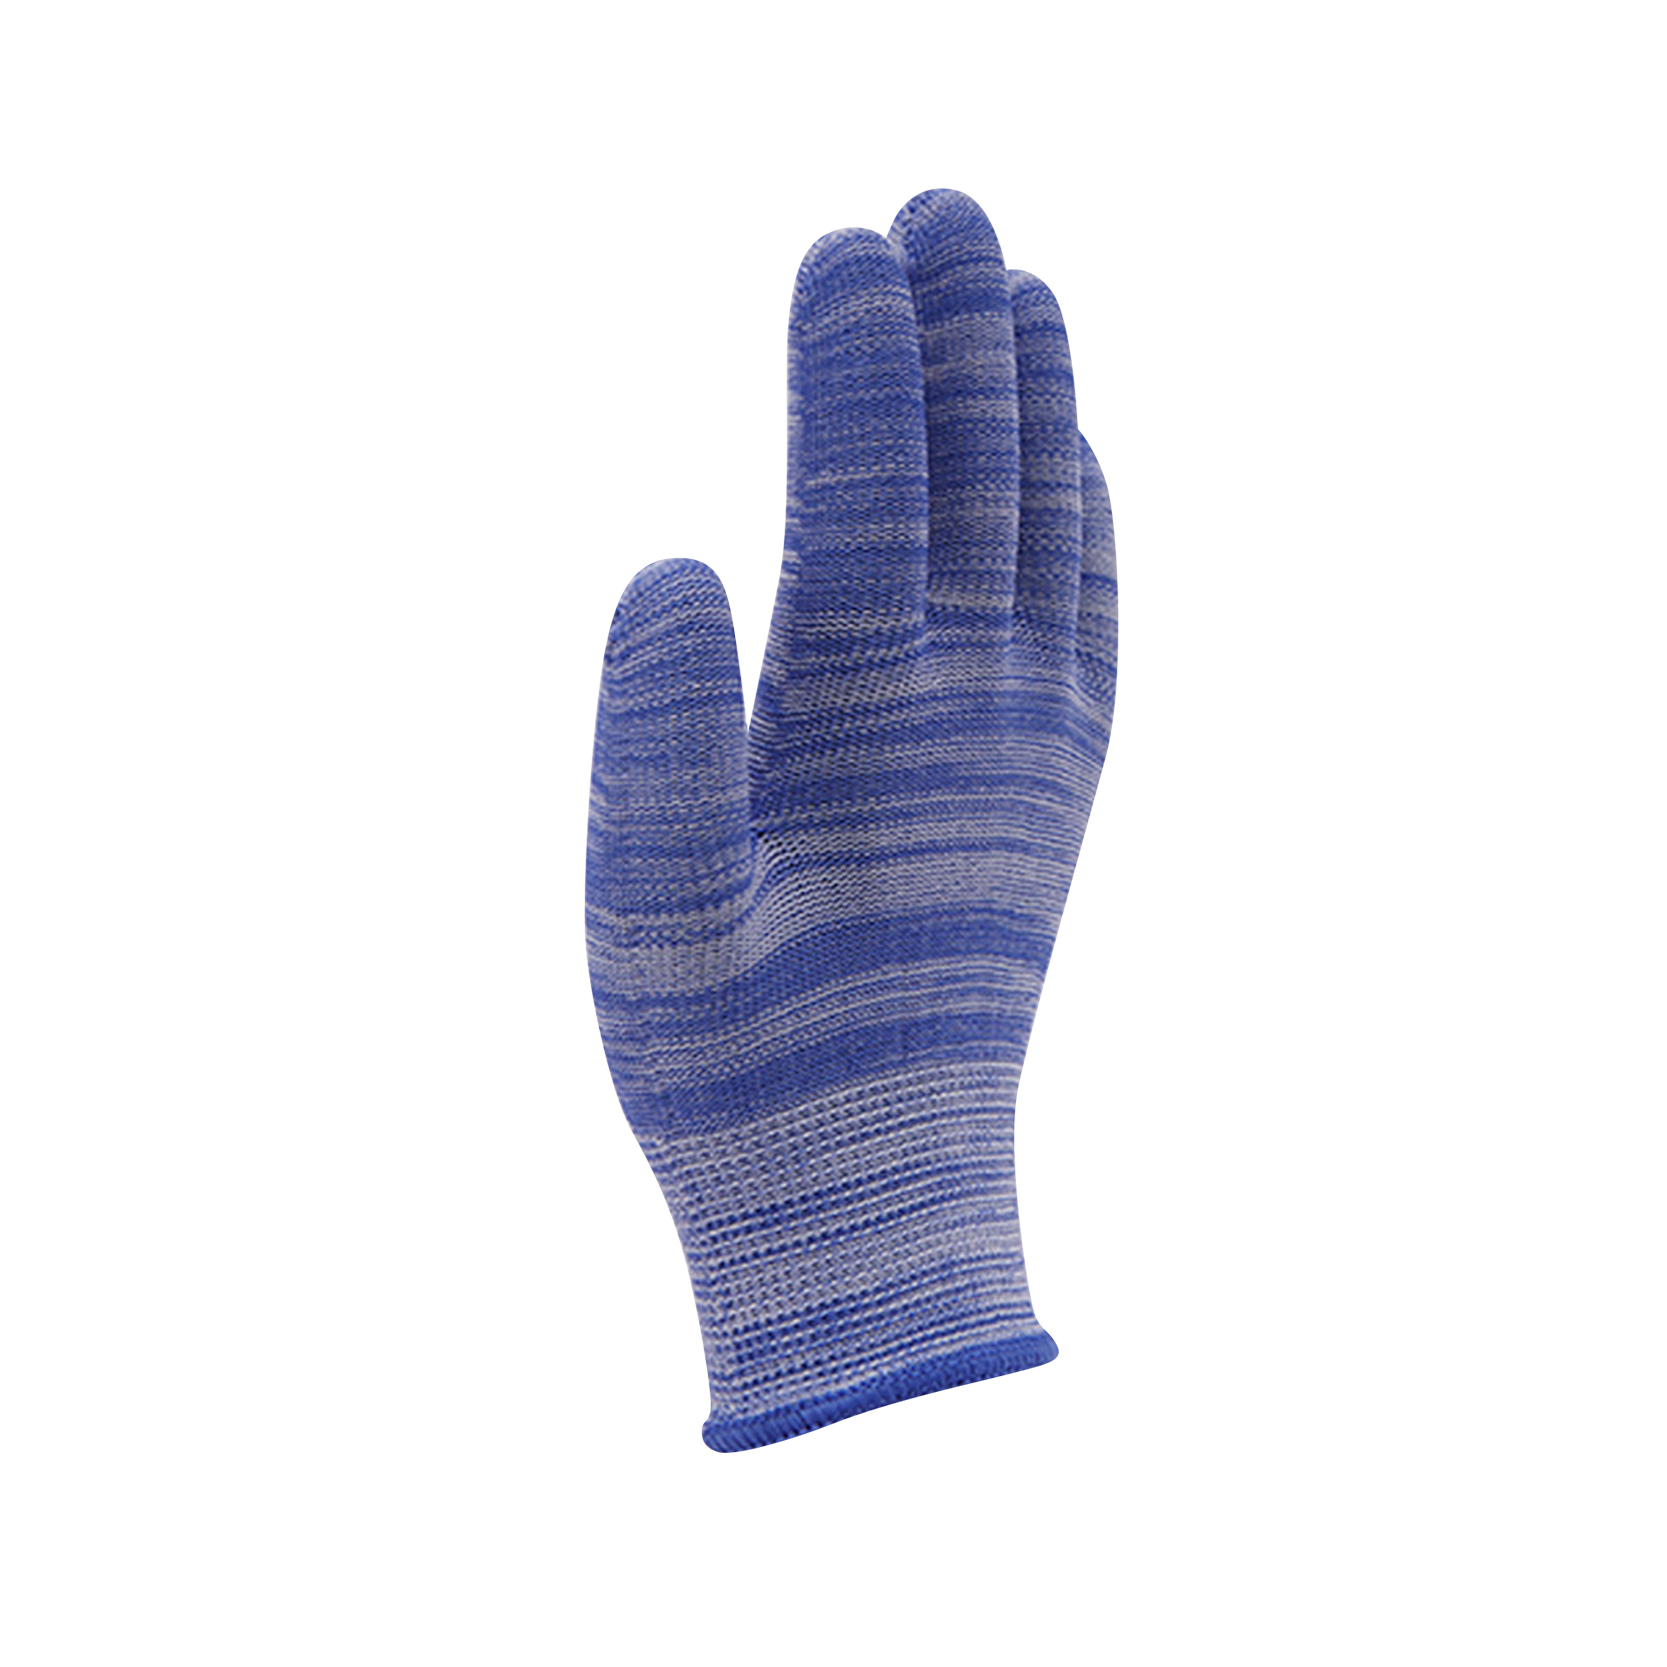 Multi-Color Protective String Knit Gloves.Regular Weight Gloves.Knitted Cotton Polyester Gloves para sa General